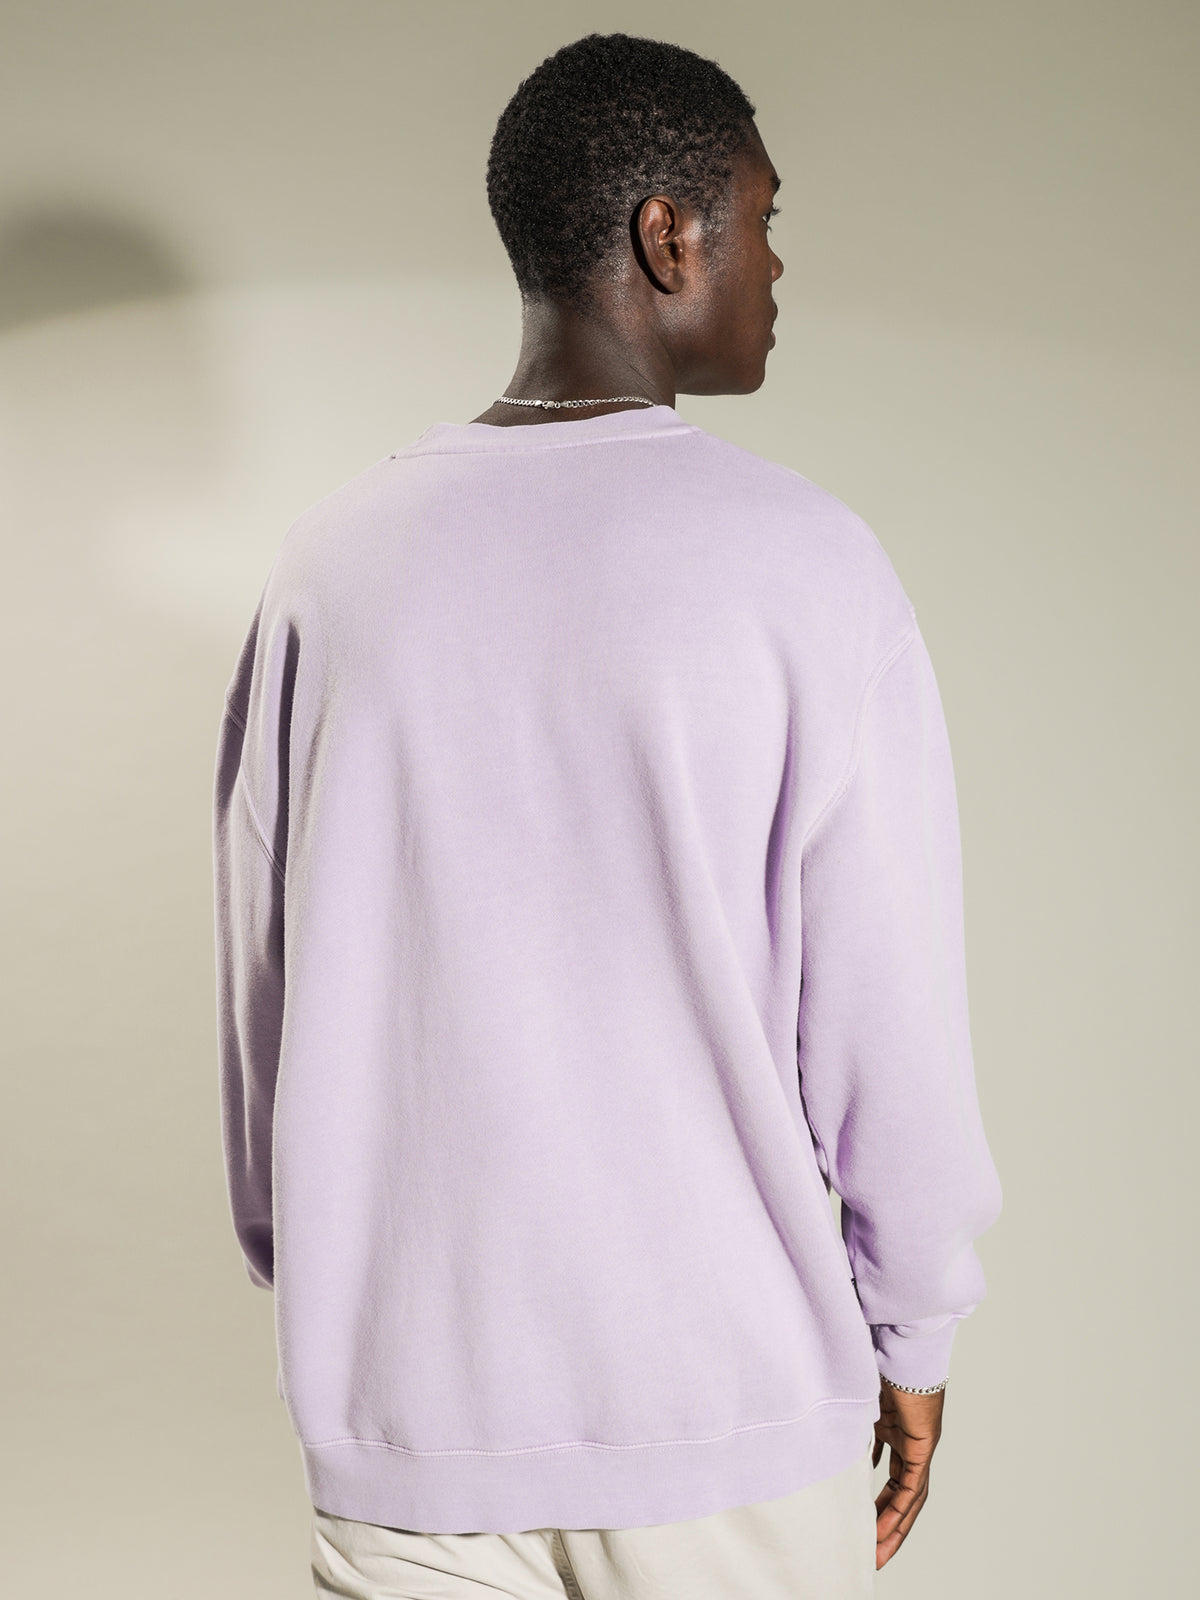 Stock Shadow Jumper in Pigment Orchid